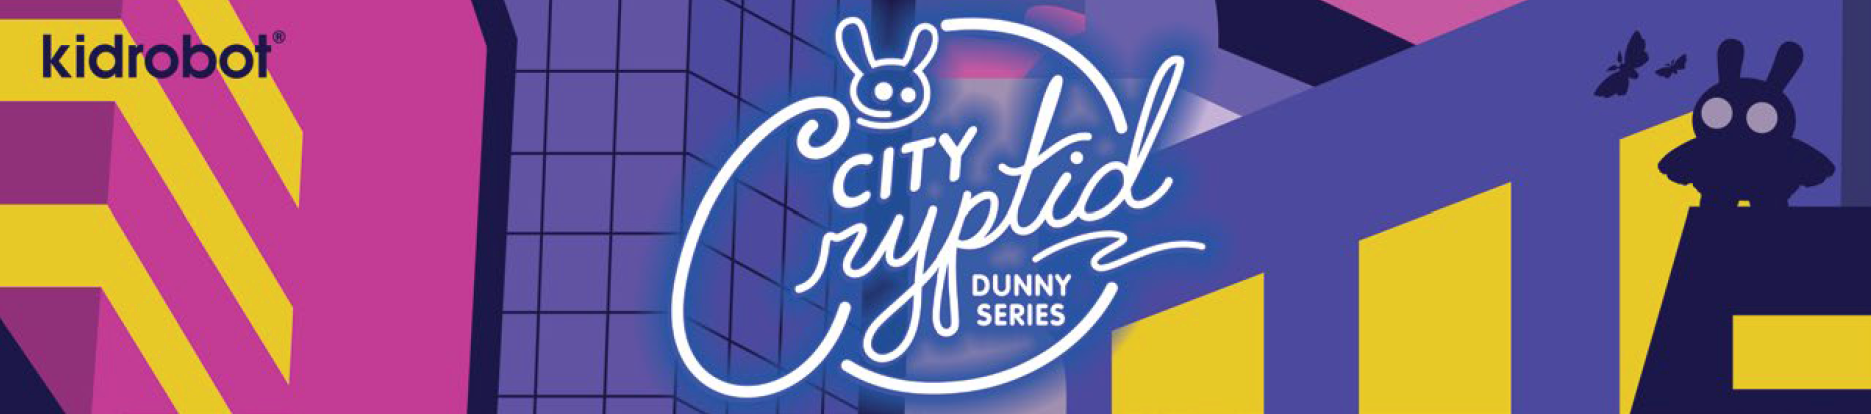 Artist Chris Lee Dunny for City Cryptid Dunny Series by Kdirobot